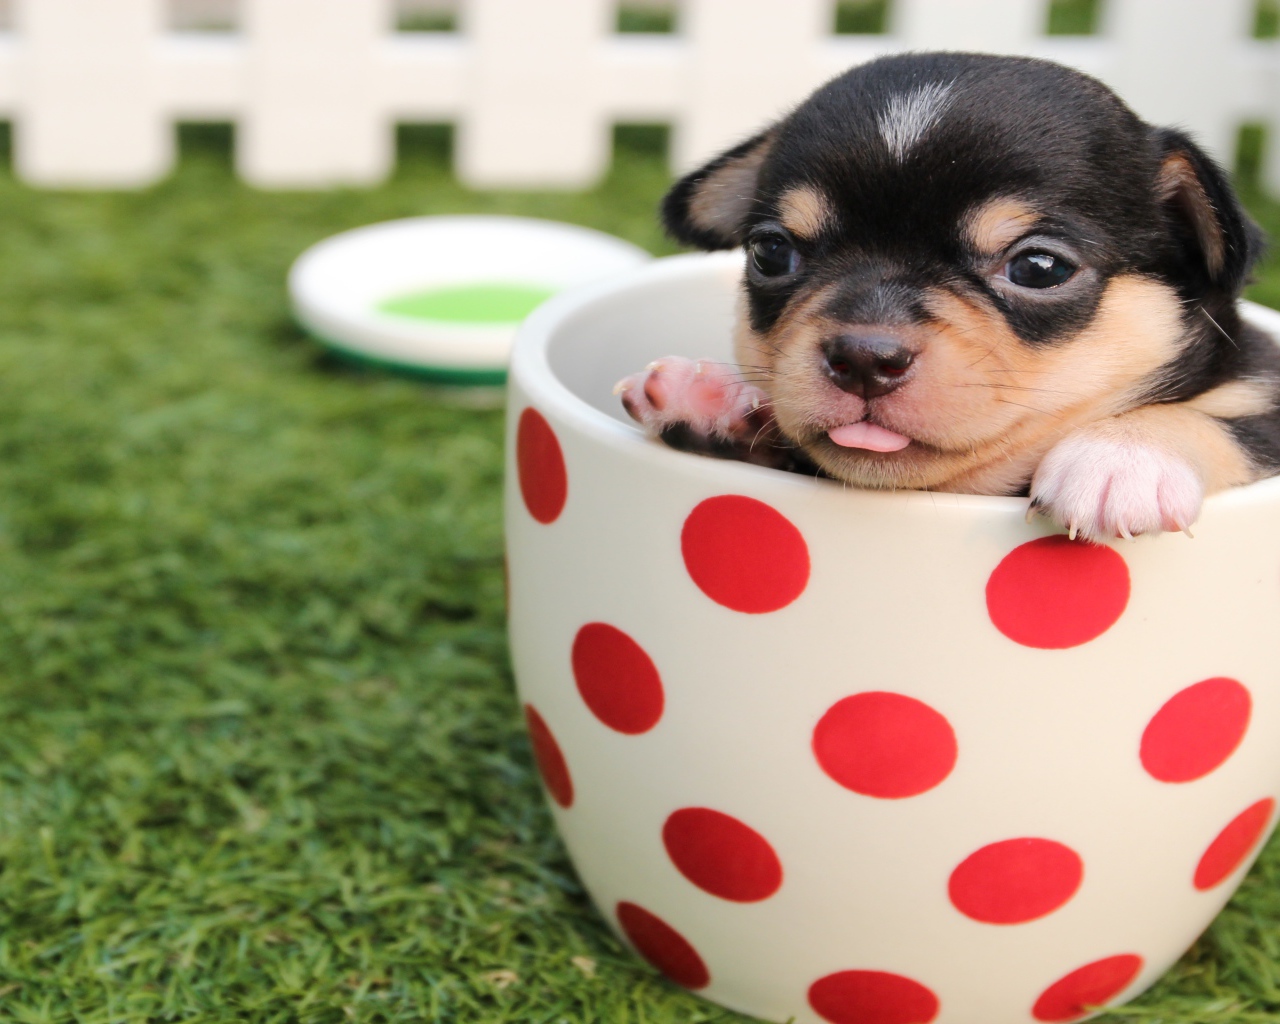 Little funny puppy sitting in a cup